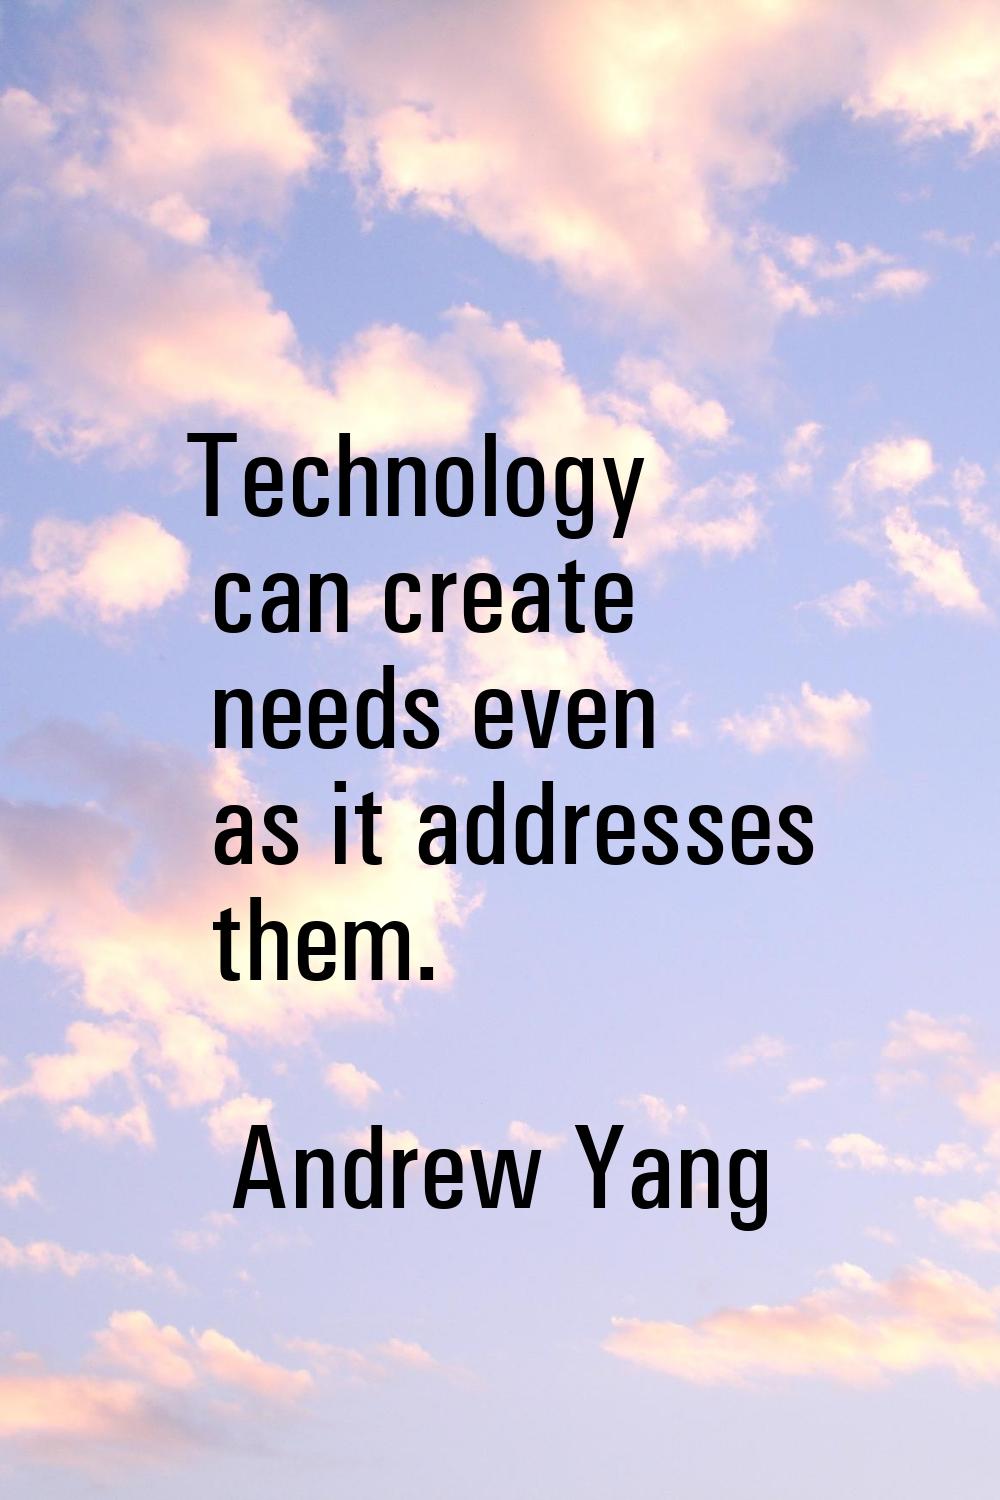 Technology can create needs even as it addresses them.